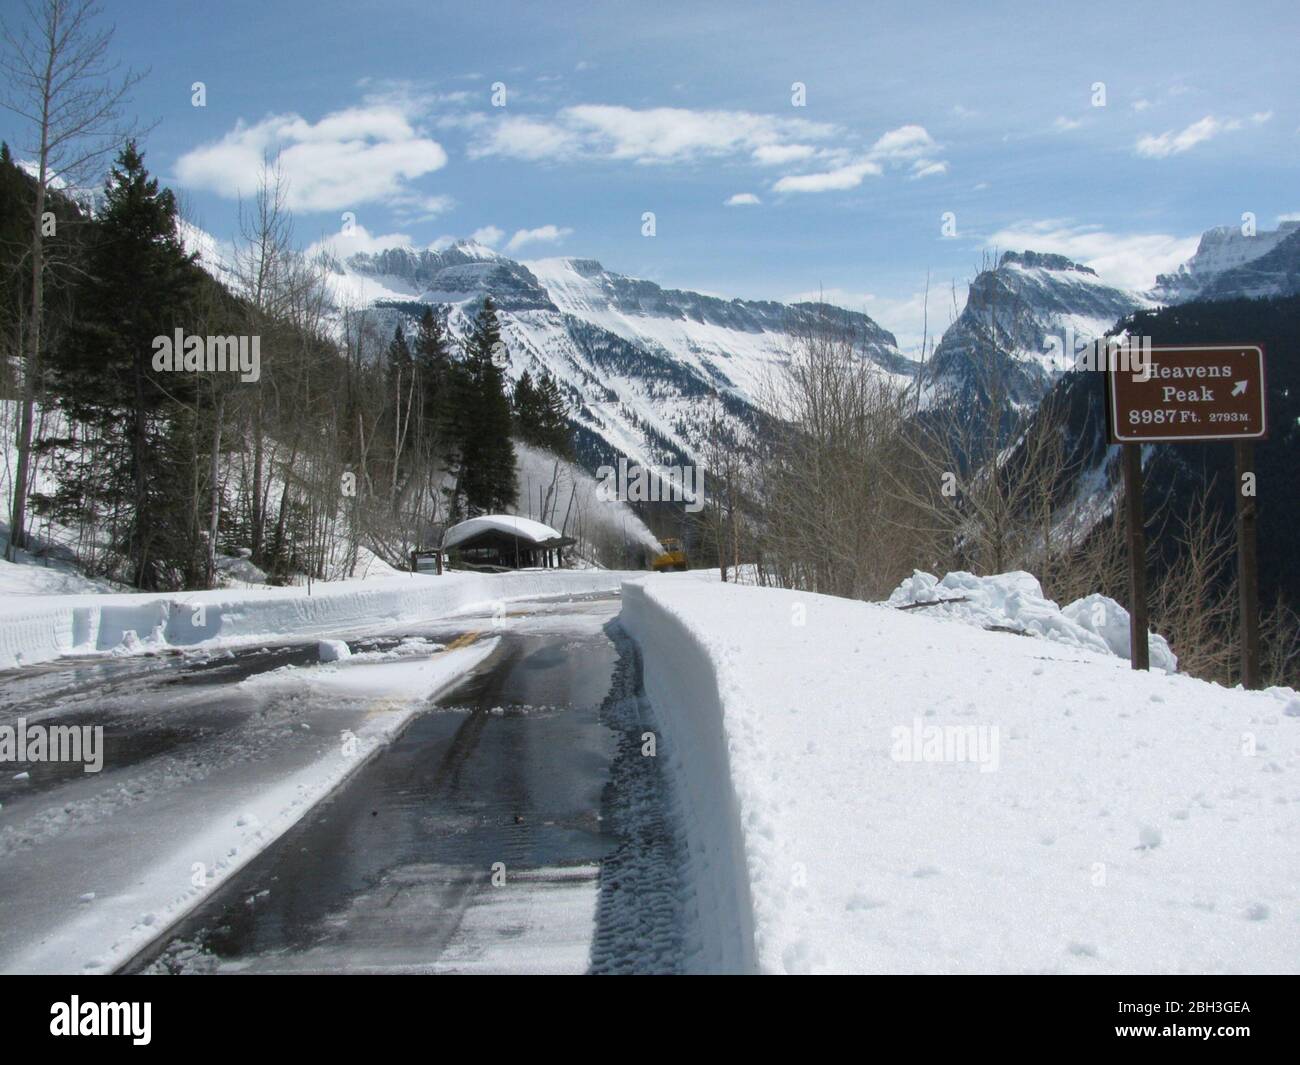 Snow removed from the Loop turnaround along the winding Going-To-The-Sun road at an elevation of 6,646 feet in Glacier National Park April 14, 2020 in Glacier, Montana. Road clearing continues despite the park being closed to visitors due to the COVID-19, coronavirus pandemic. Stock Photo